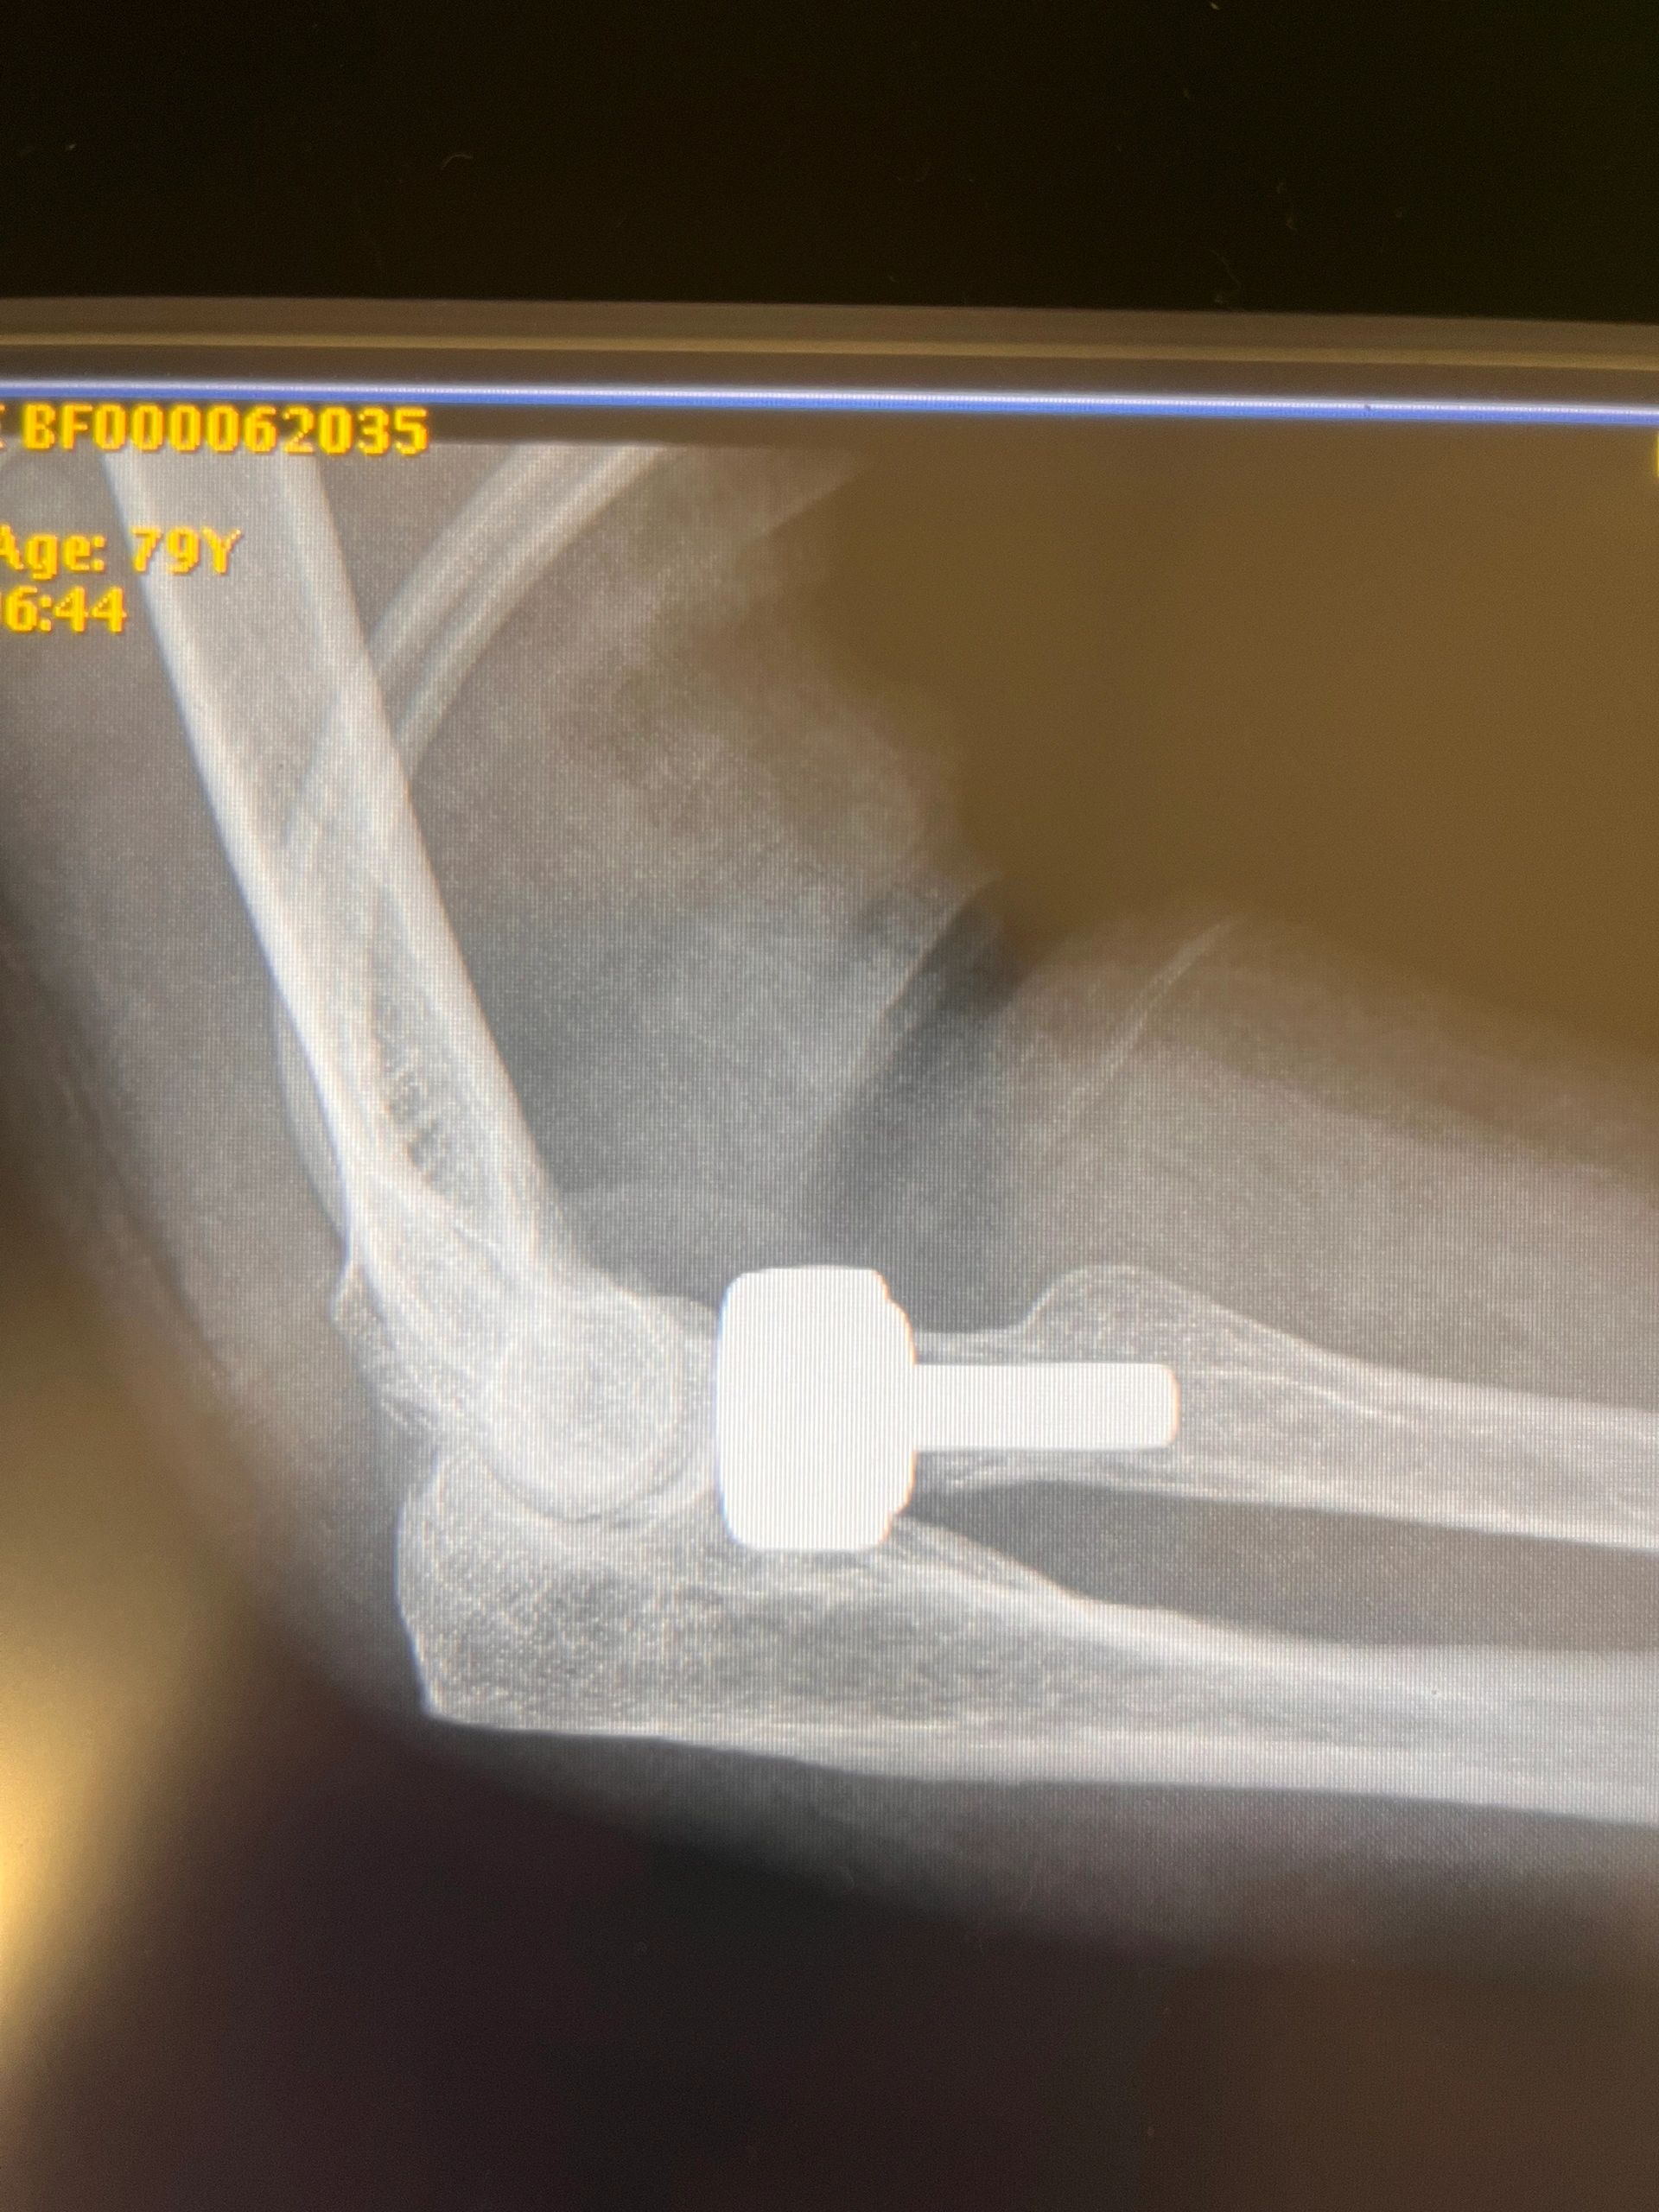 Top Tier Orthopedics & Center for Joint Replacement Co.